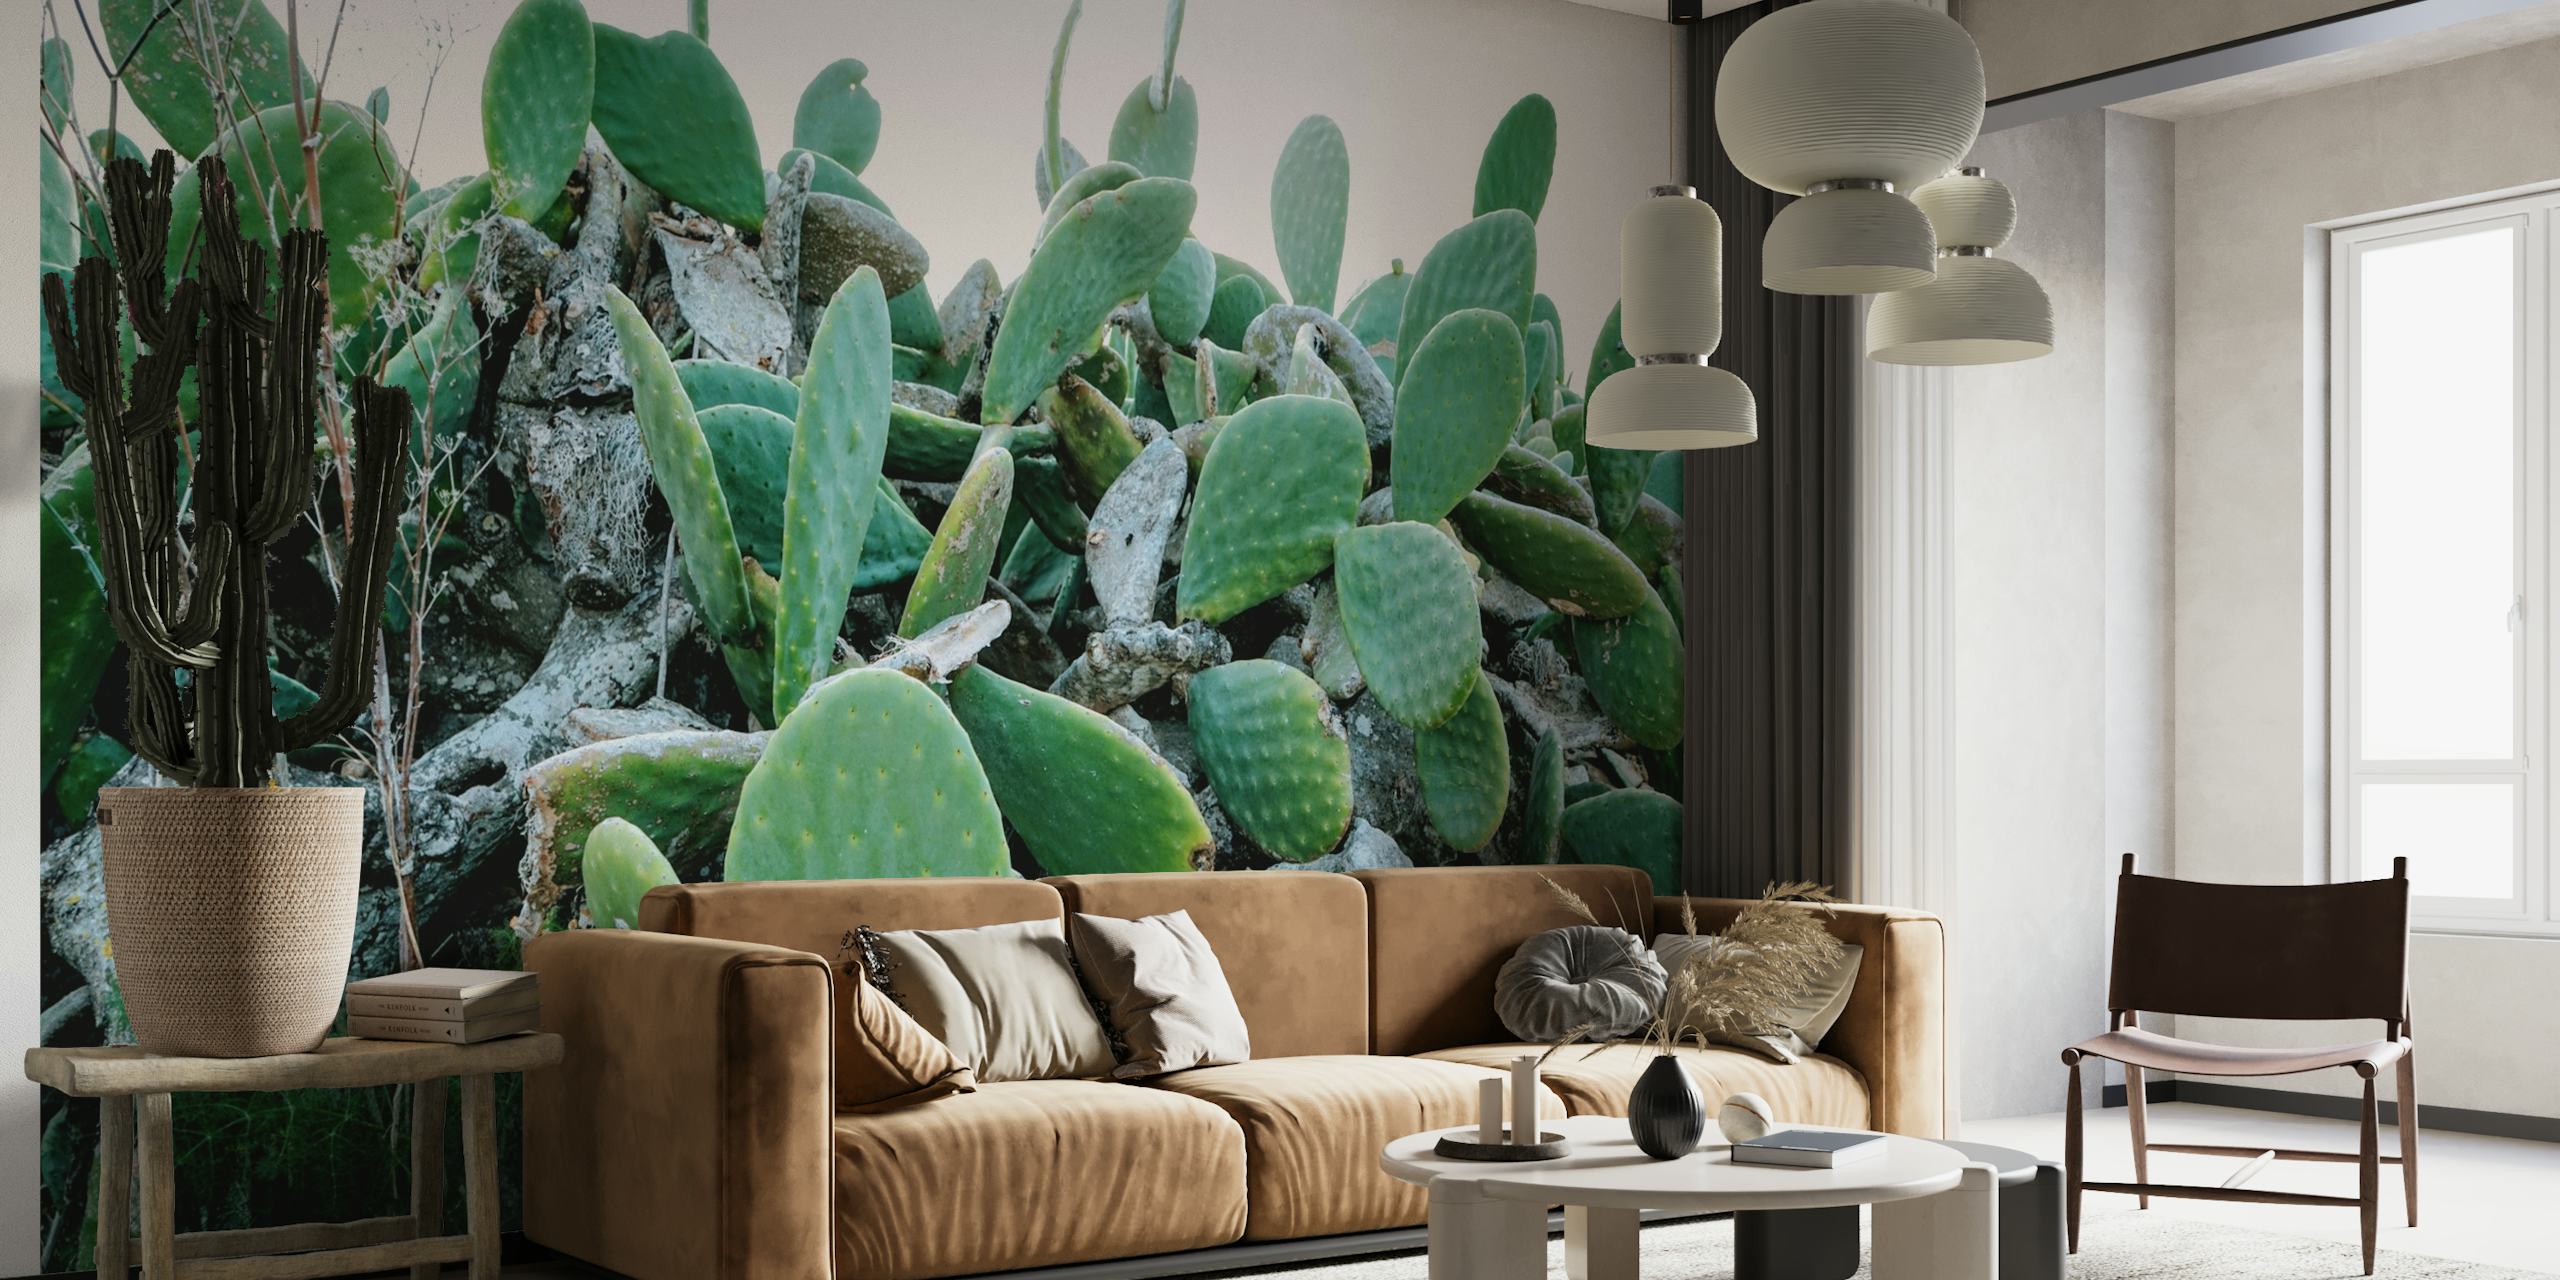 Cactus Gardens wall mural with vibrant cluster of cacti